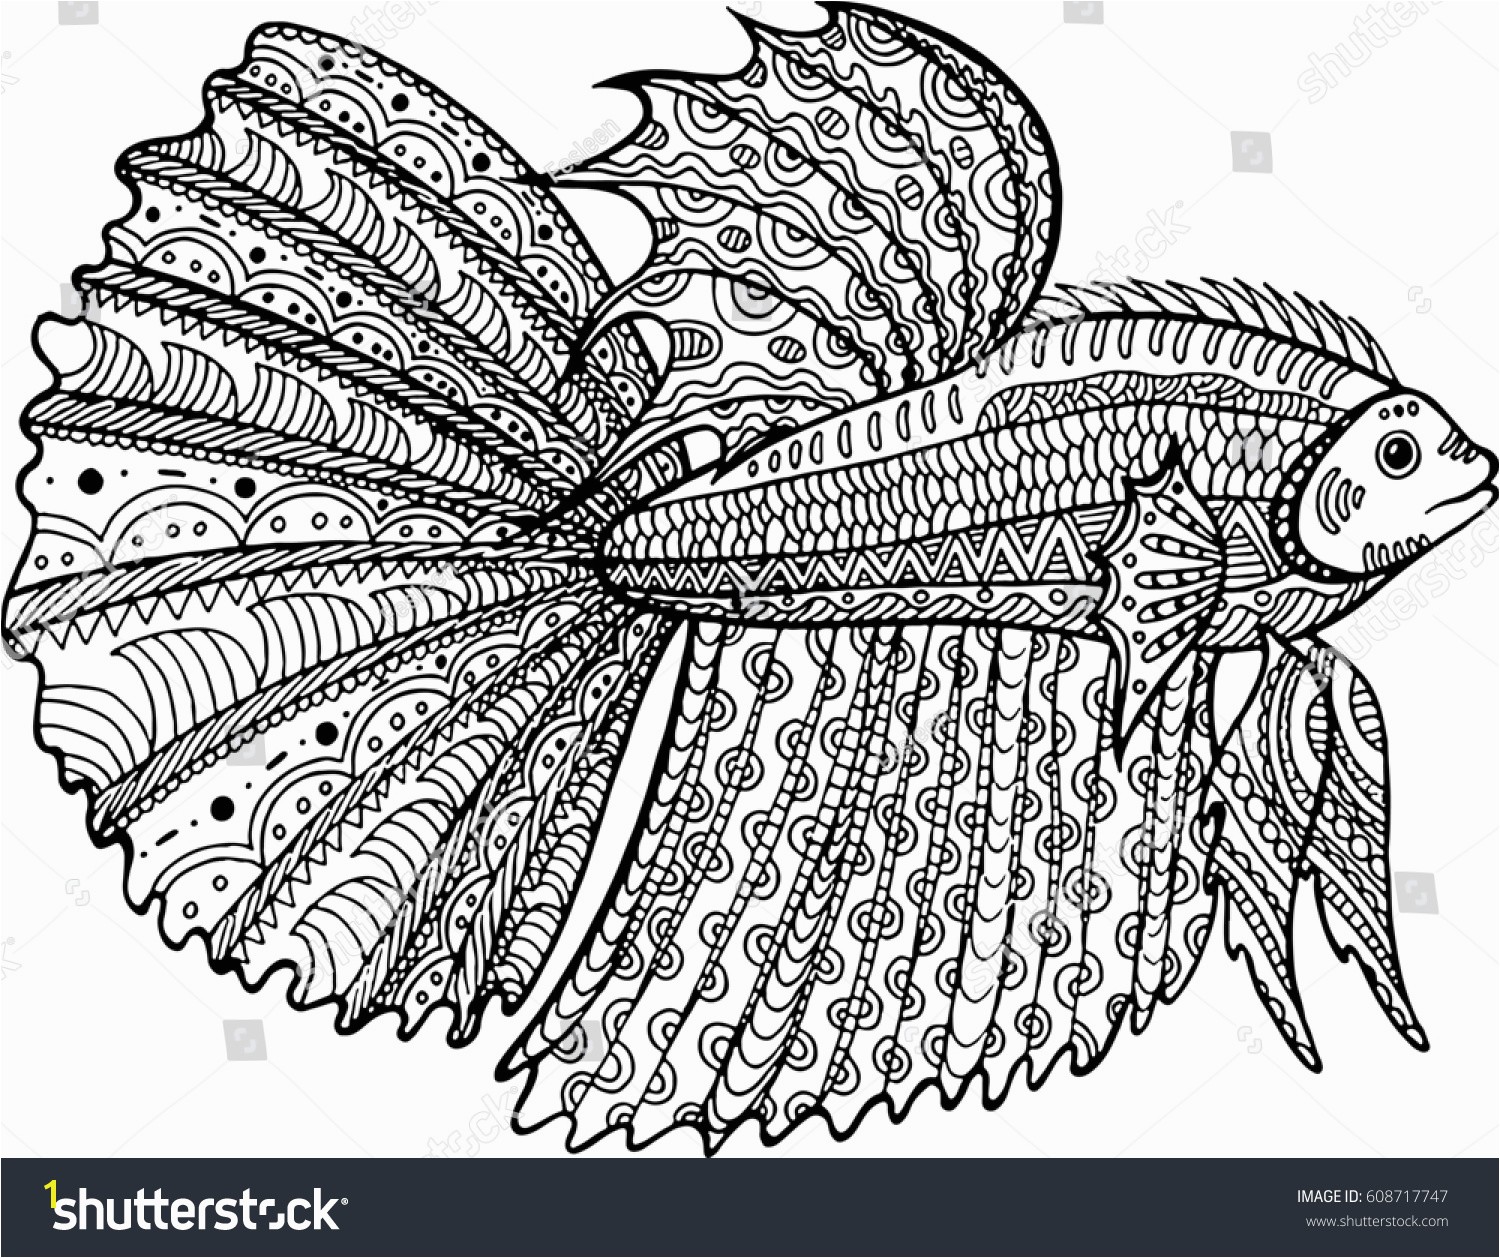 Betta fish hand drawn coloring page Zentangle doodle art for adult and children coloring book